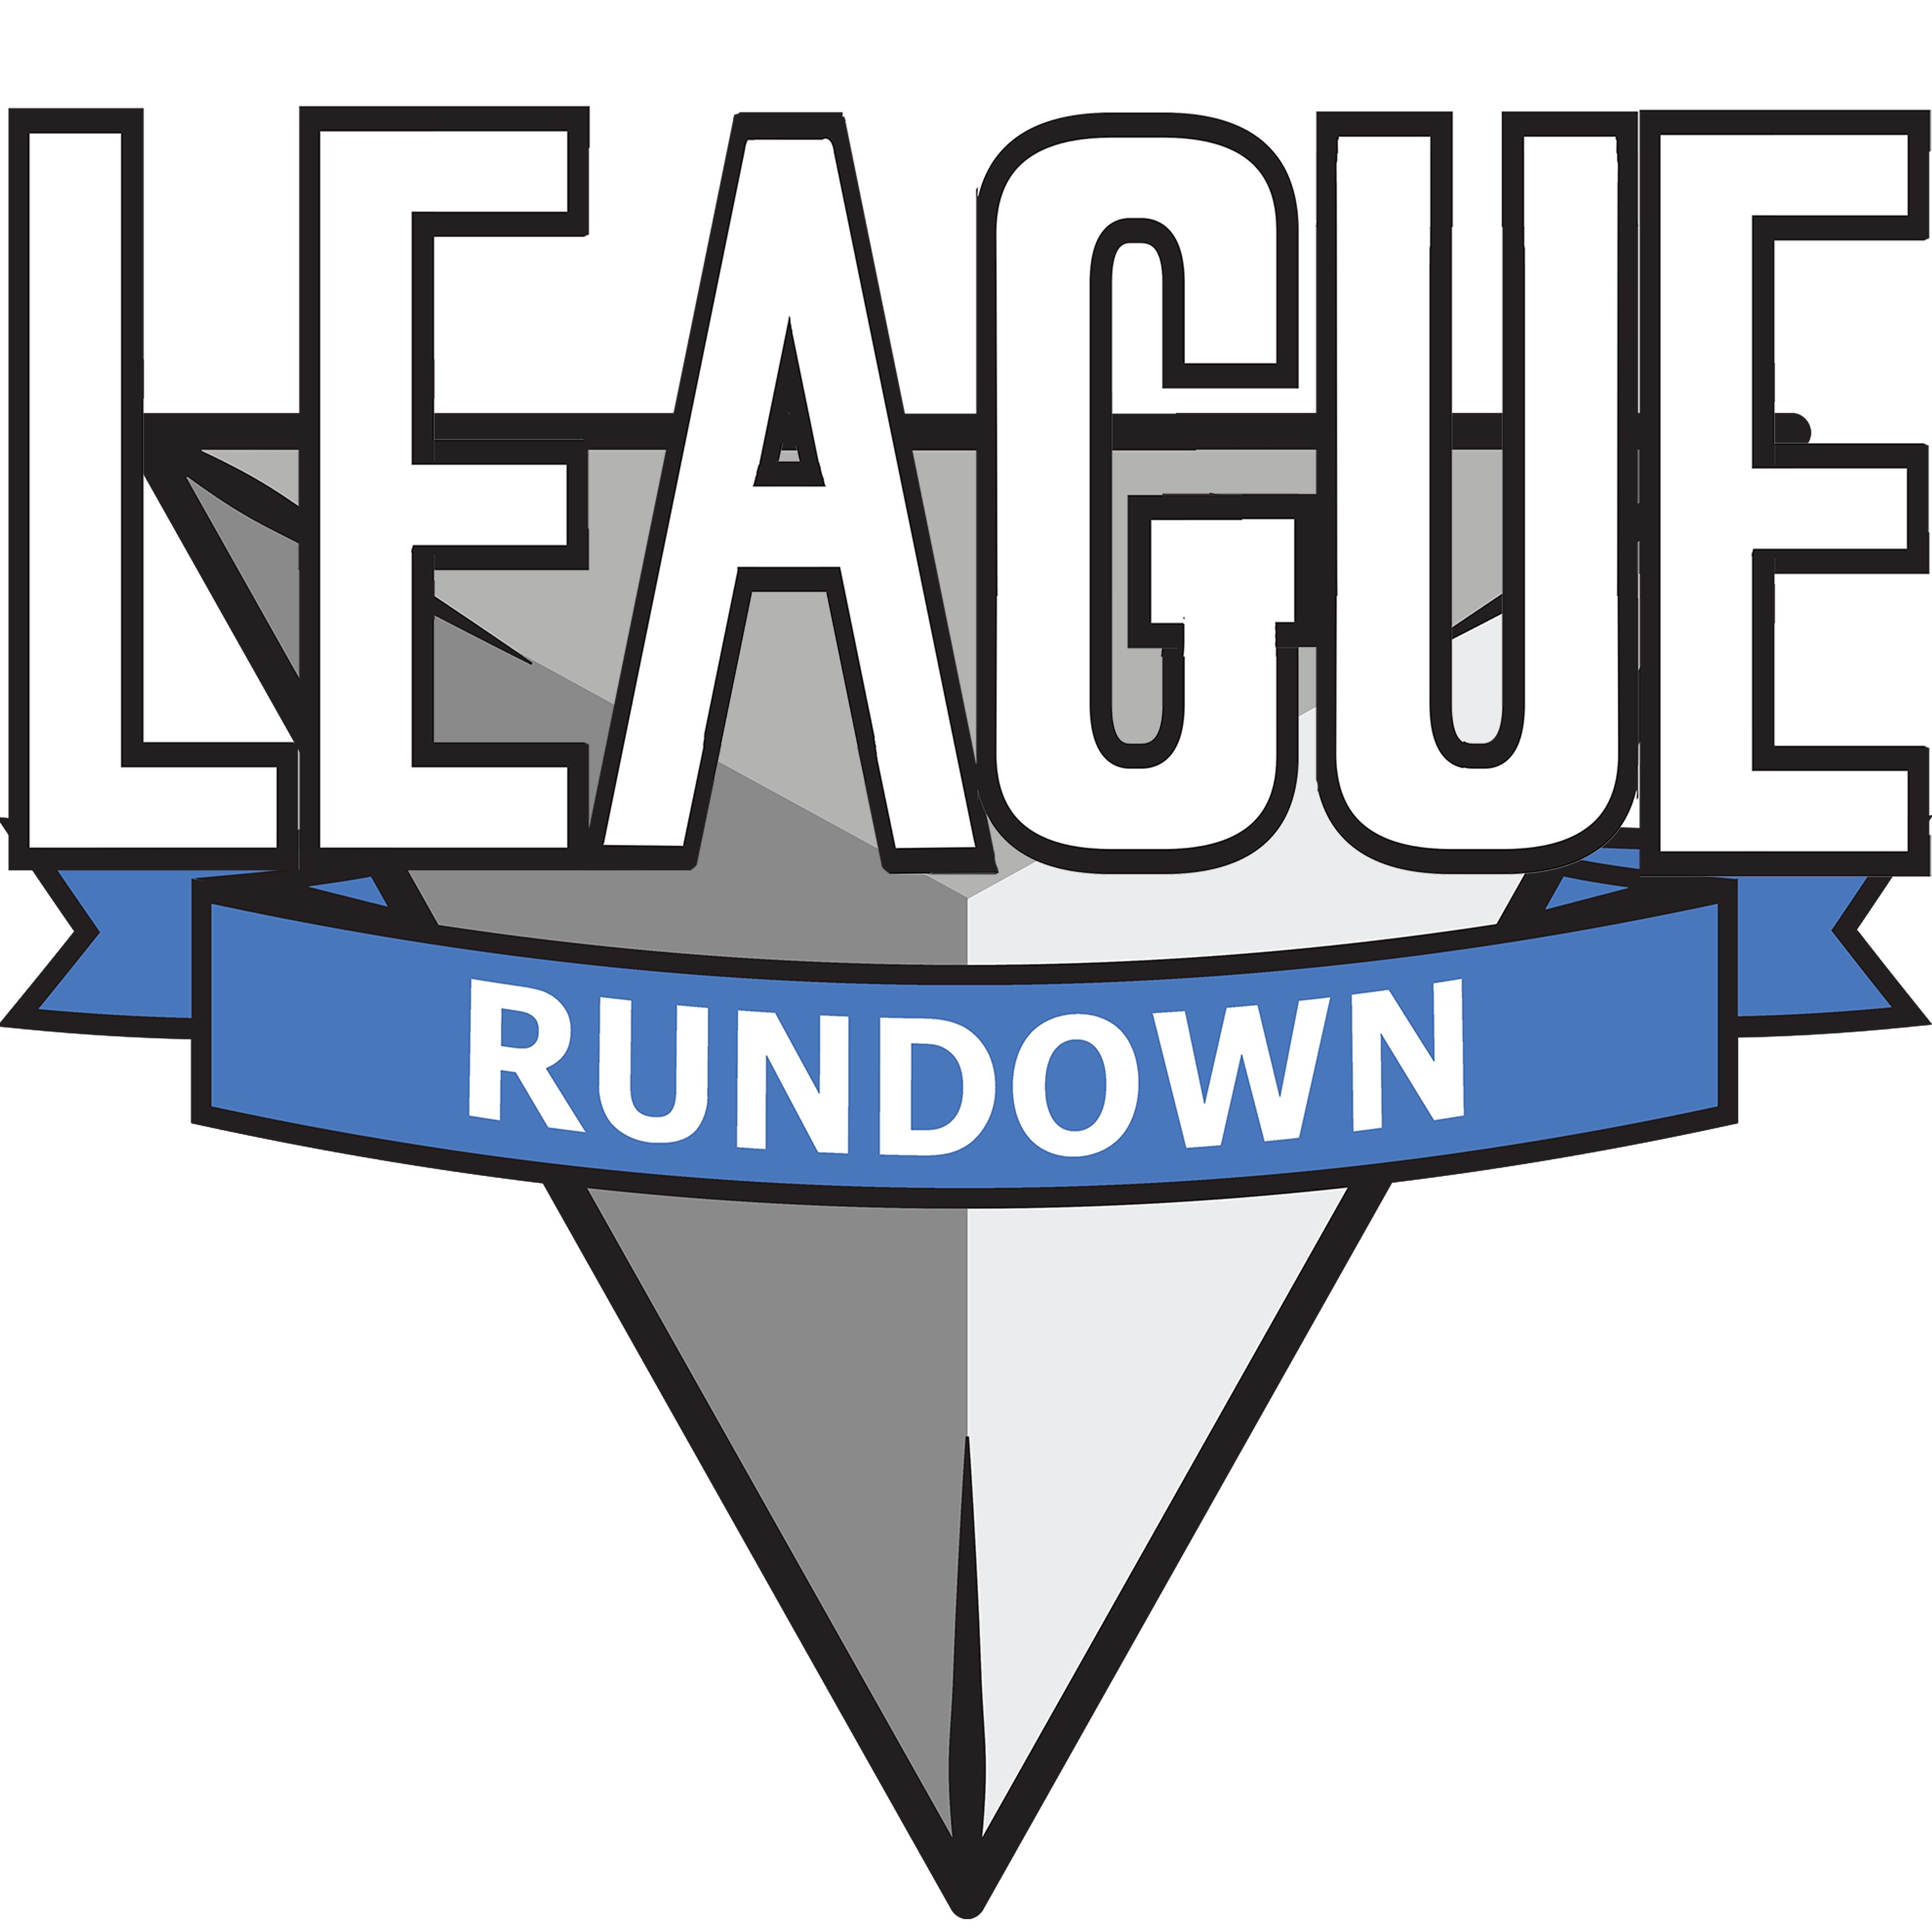 League Rundown - Episode 500: Who Let Us Get Away with This for So Long